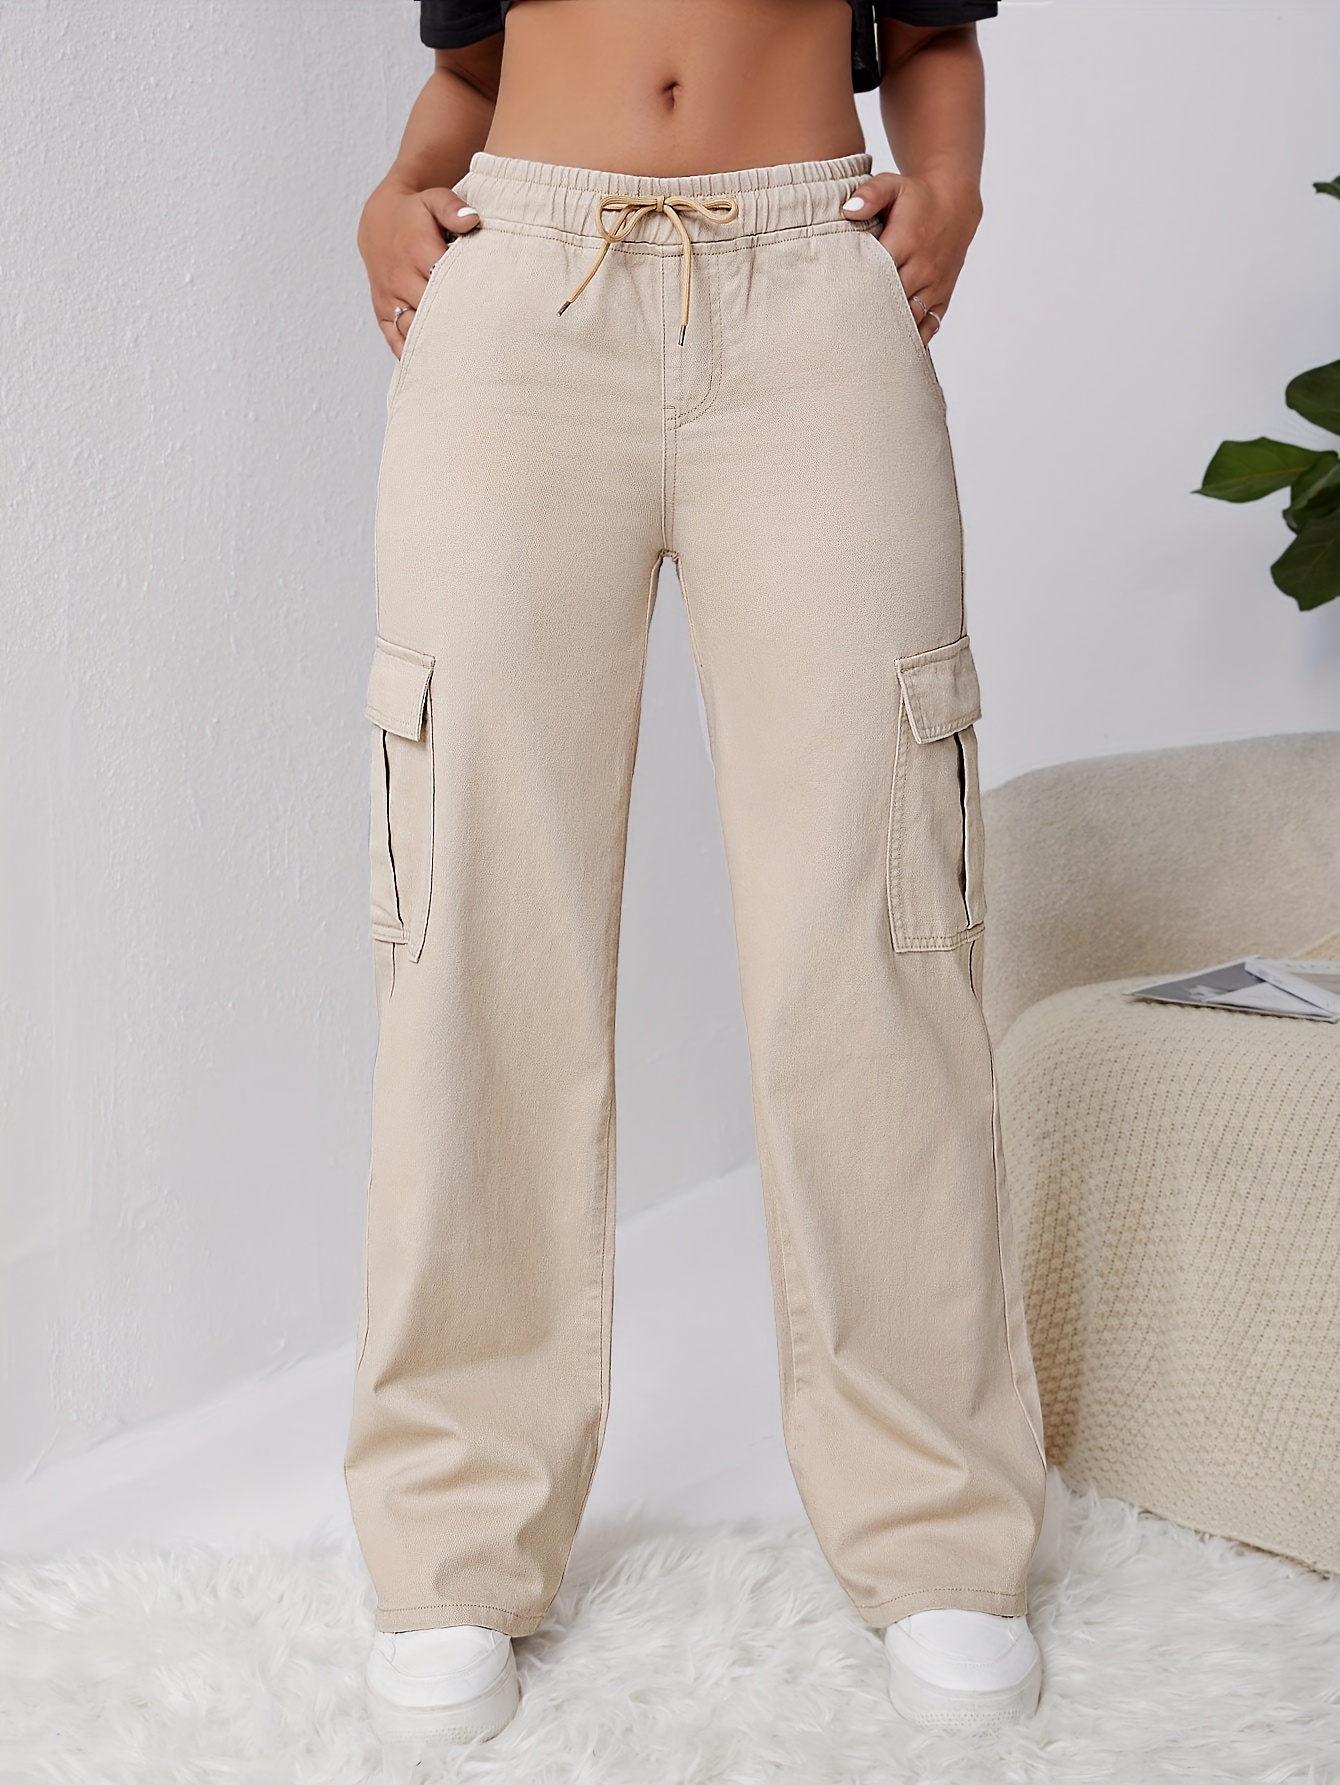 PMUYBHF Womens Cargo Pants and Shorts Womens Casual Solid Pockets Elastic  Belt Waist Pants Mid Long Length Trousers Womens Loose Pants with Pockets